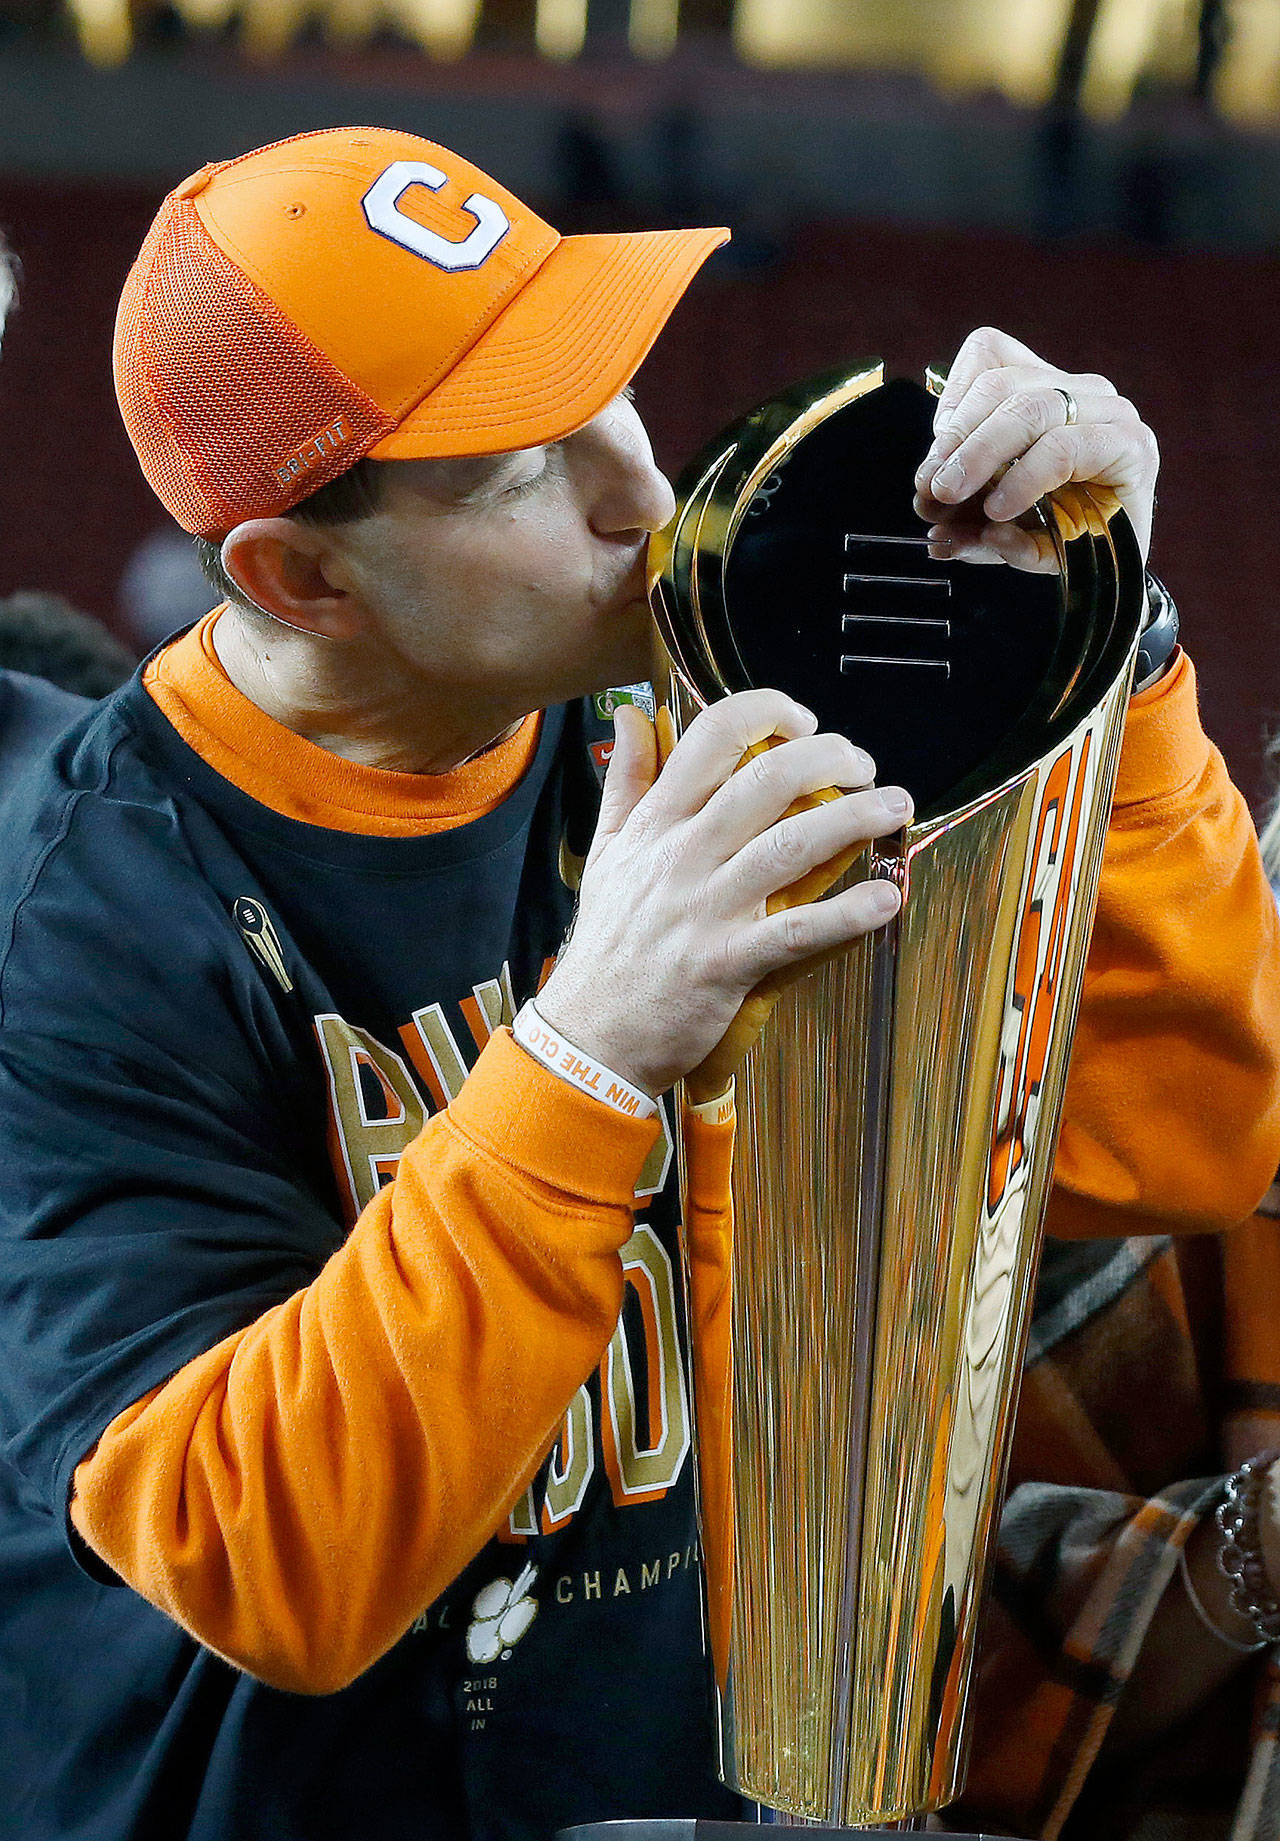 January 07, 2019 Clemson Tigers head coach Dabo Swinney kisses the trophy after the National Championship game between the Clemson Tigers and the Alabama Crimson Tide at Levi’s Stadium in Santa Clara, California. (Charles Baus/CSM via ZUMA Wire)